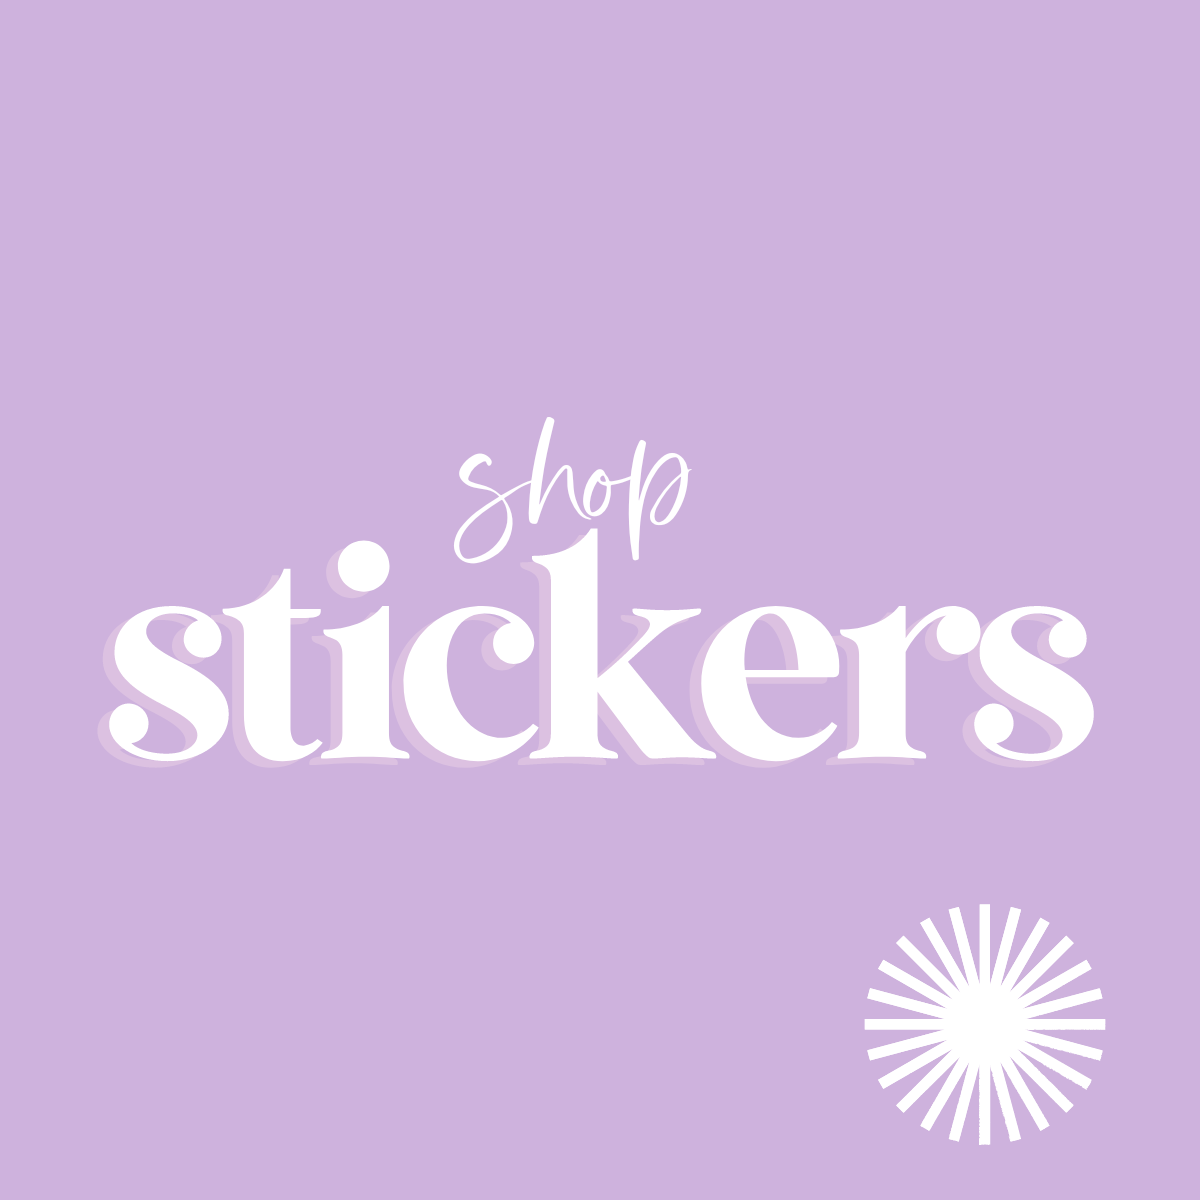 All Stickers